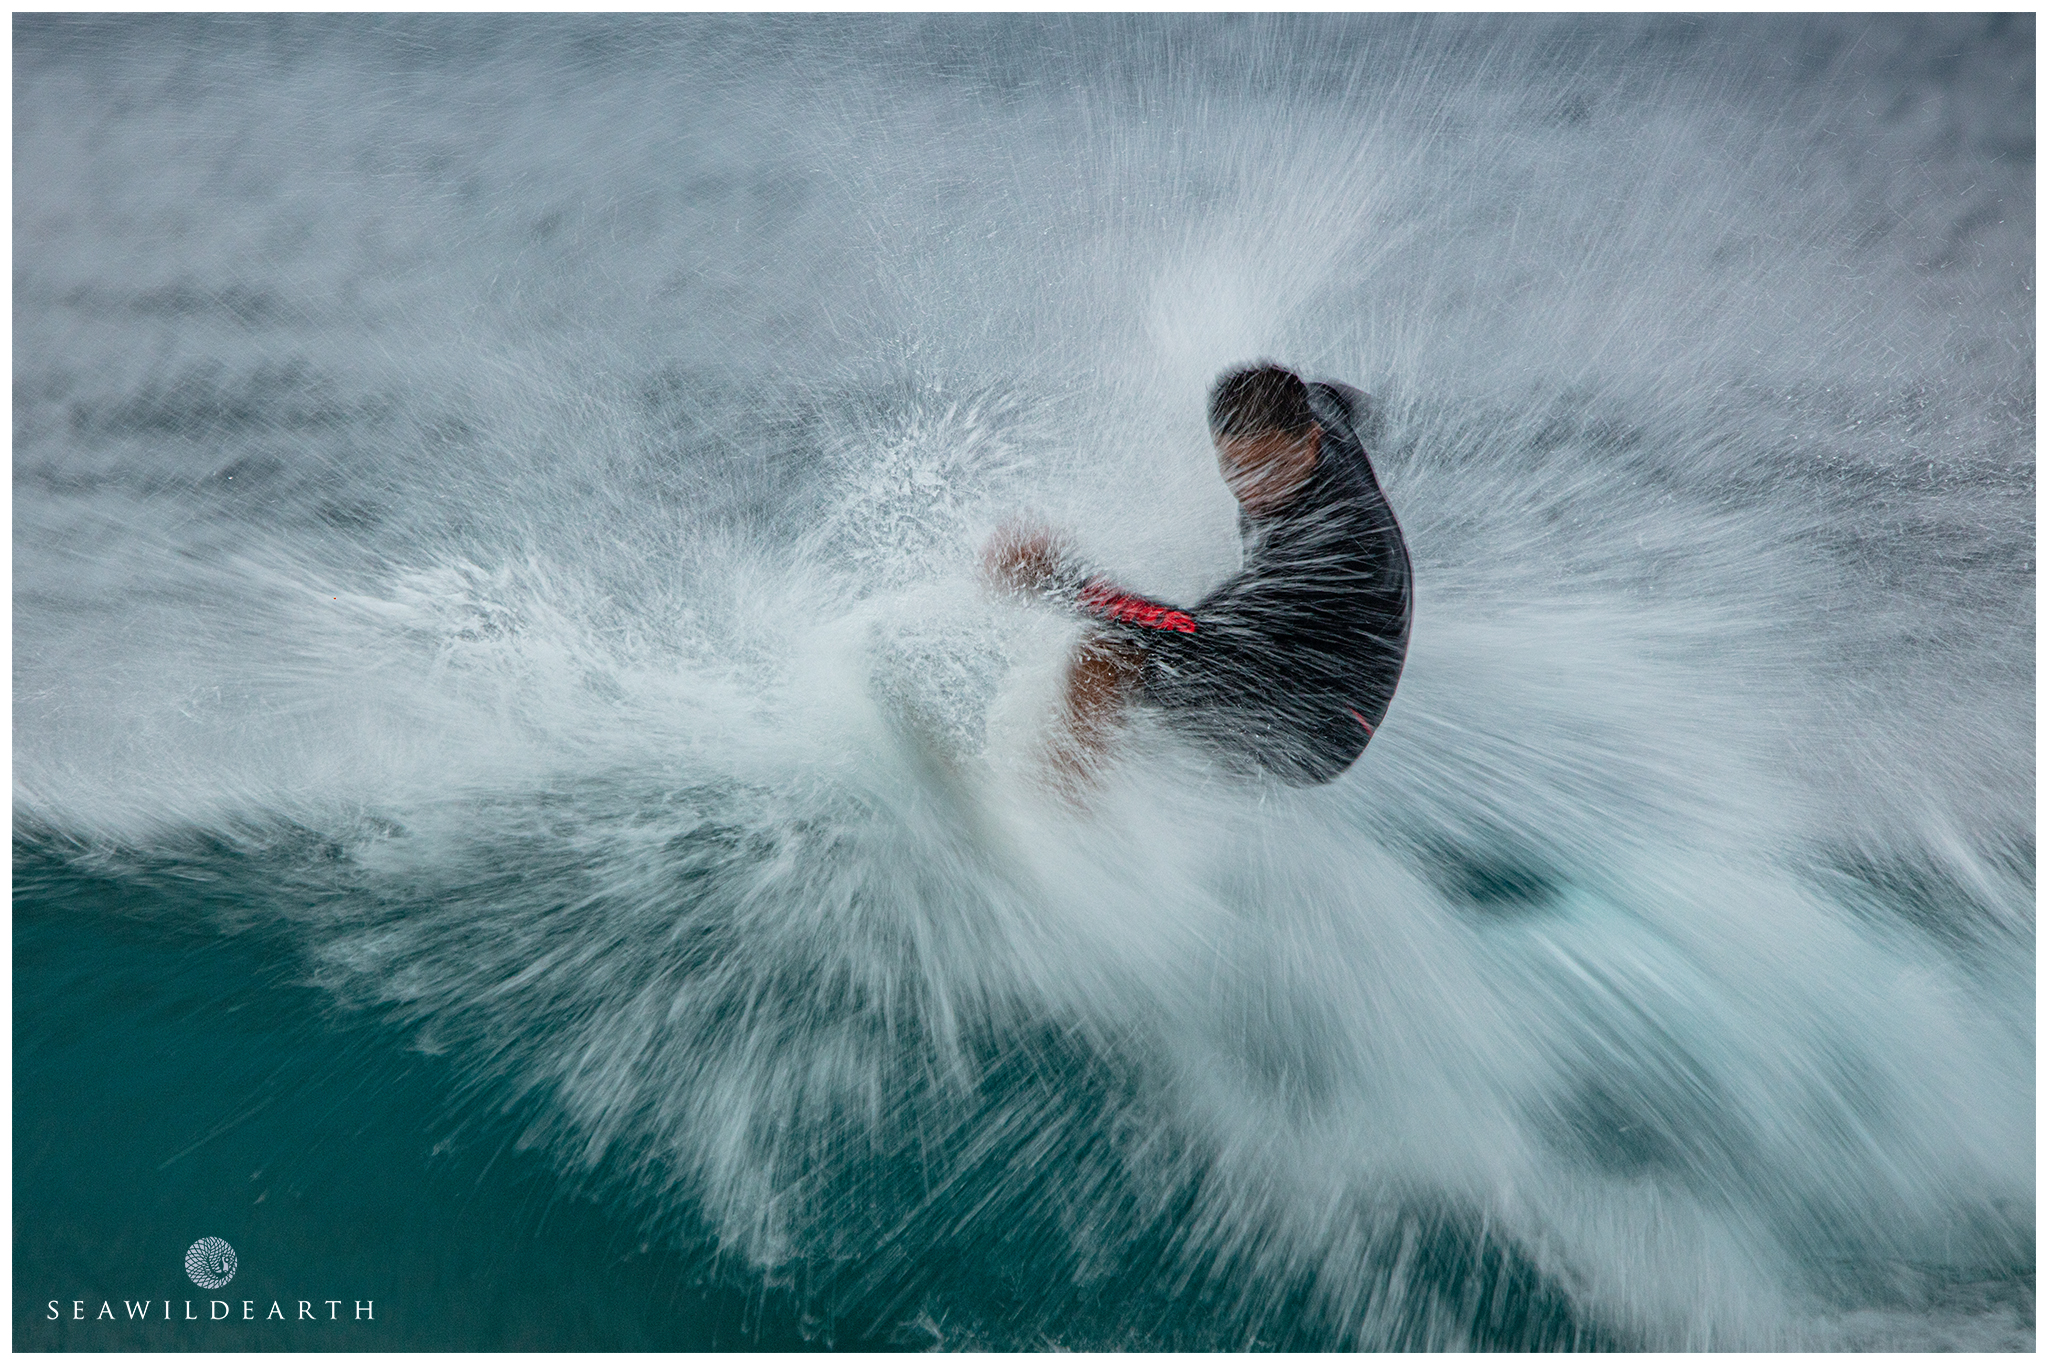 Motion blur in surf photography